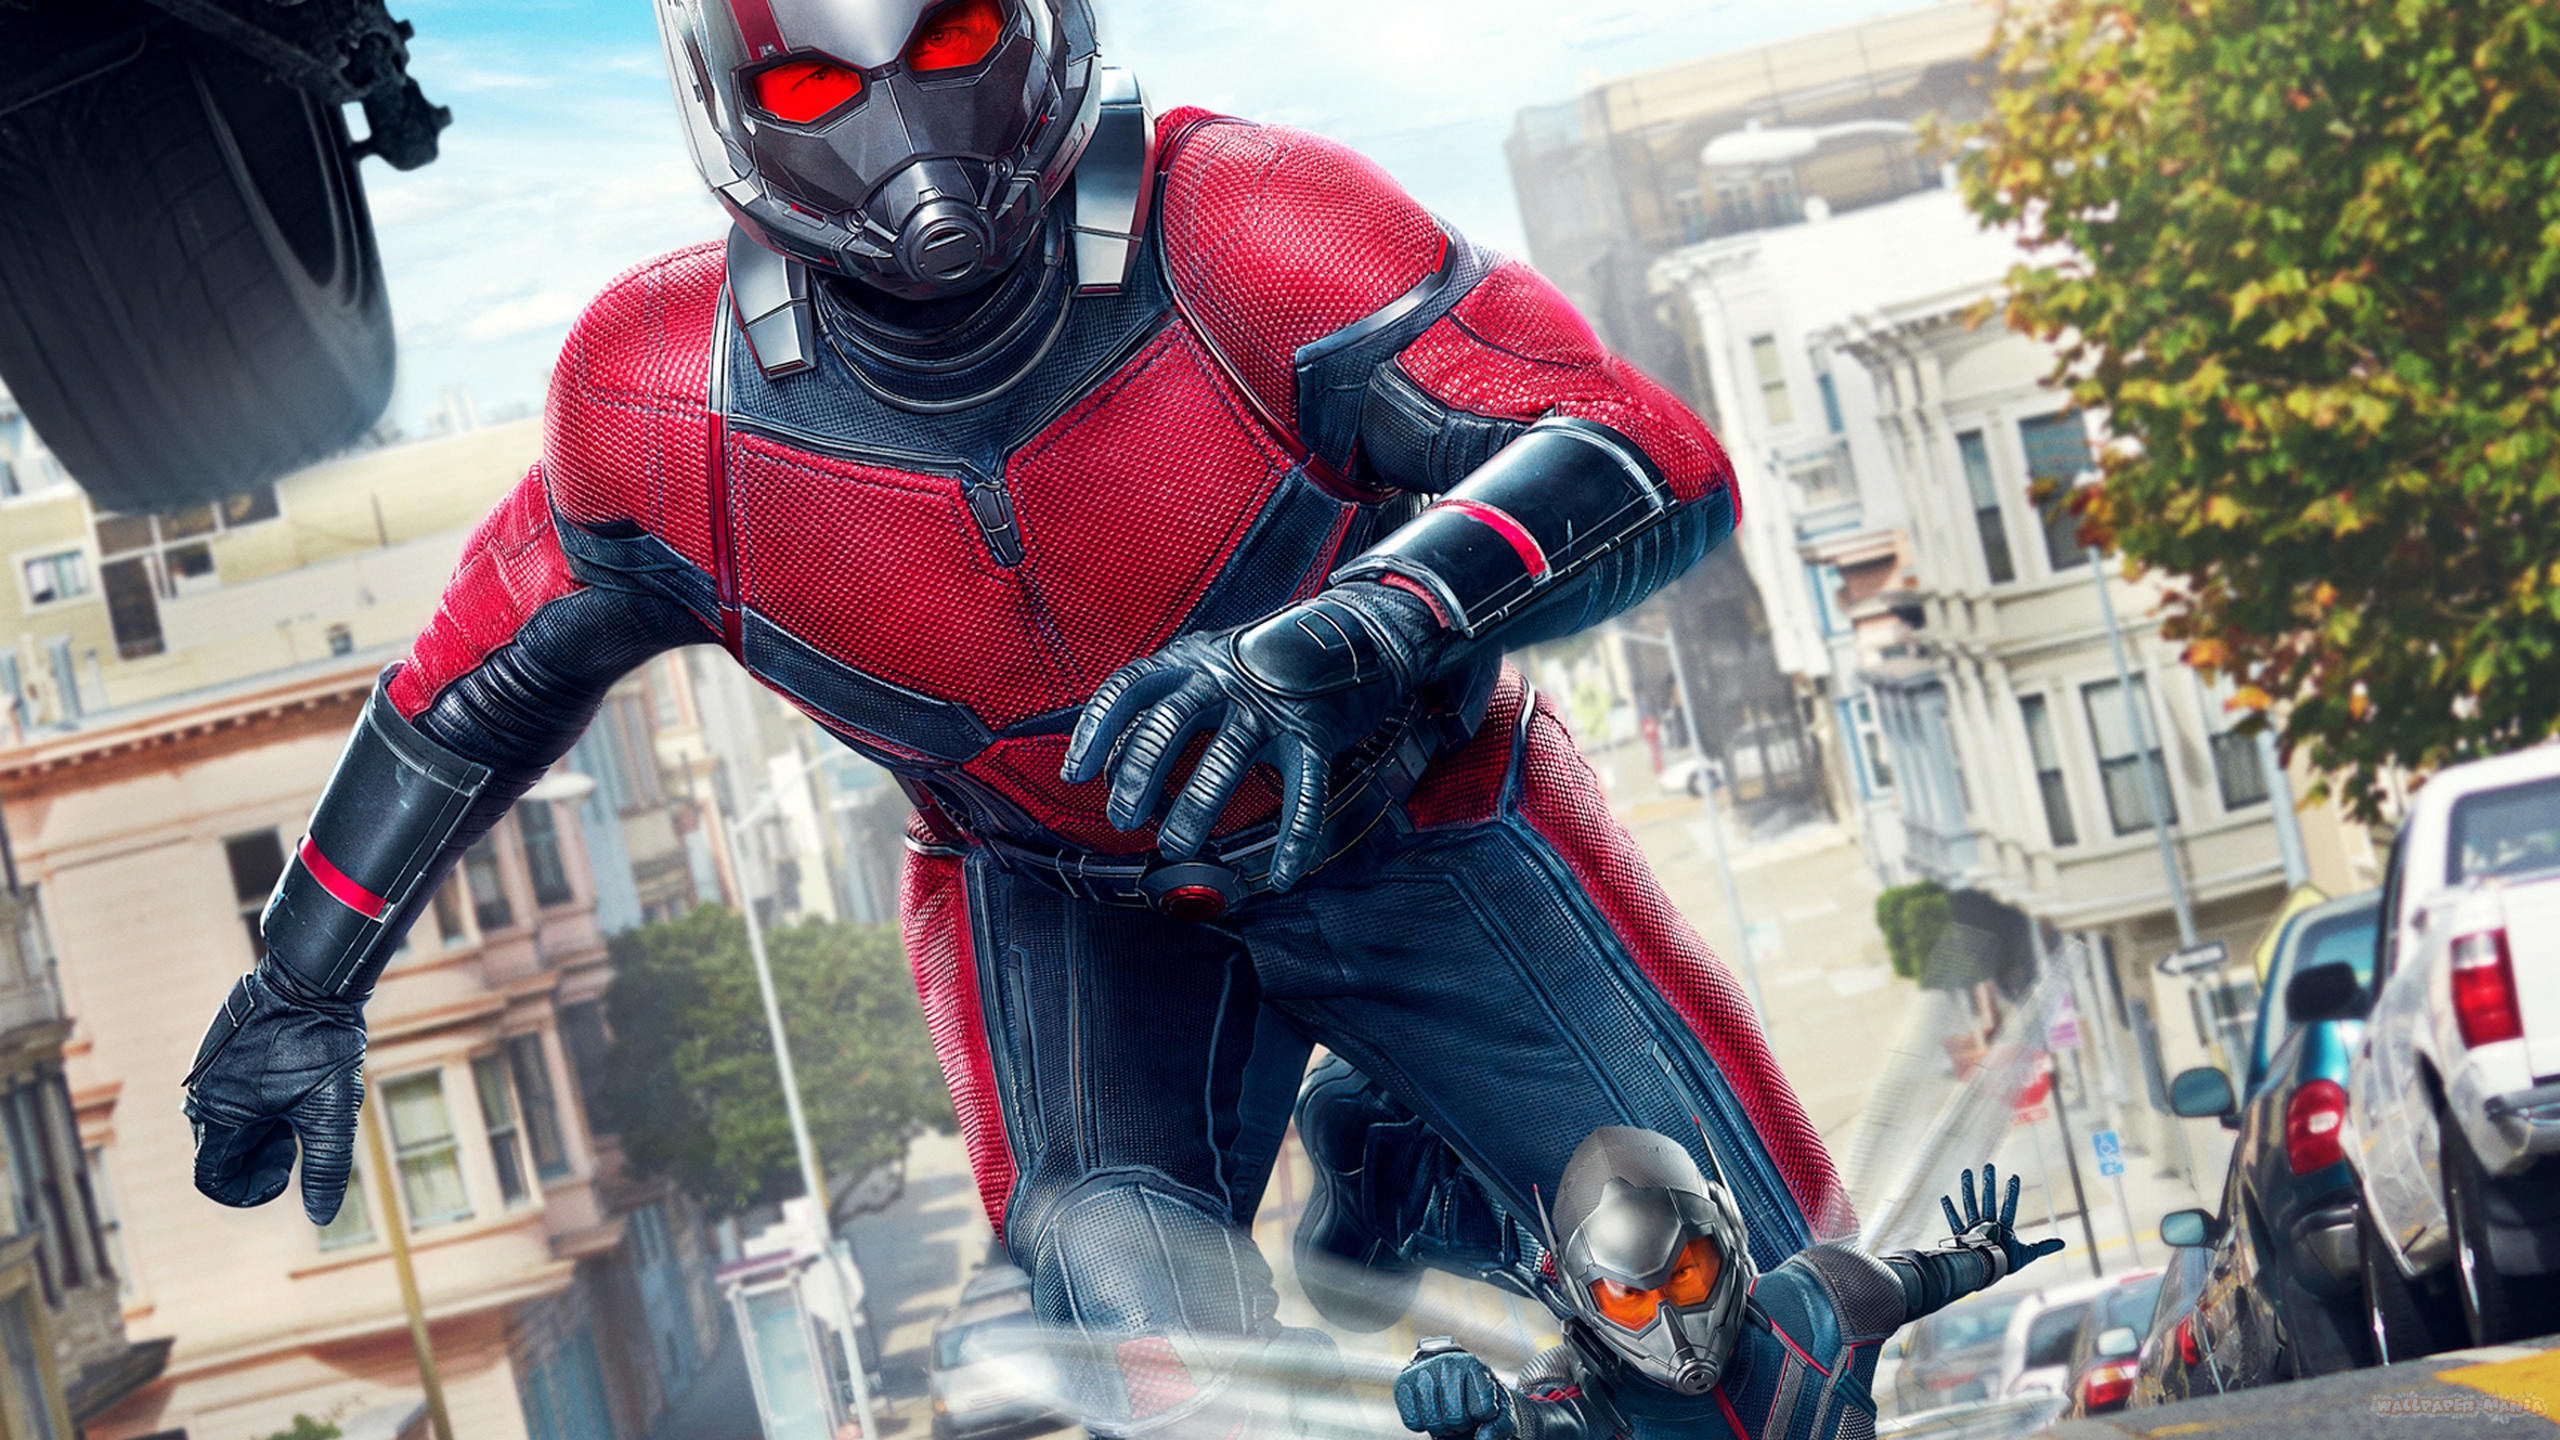 Ant Man and the Wasp Movie HD Wallpaper 65440 2560x1440px